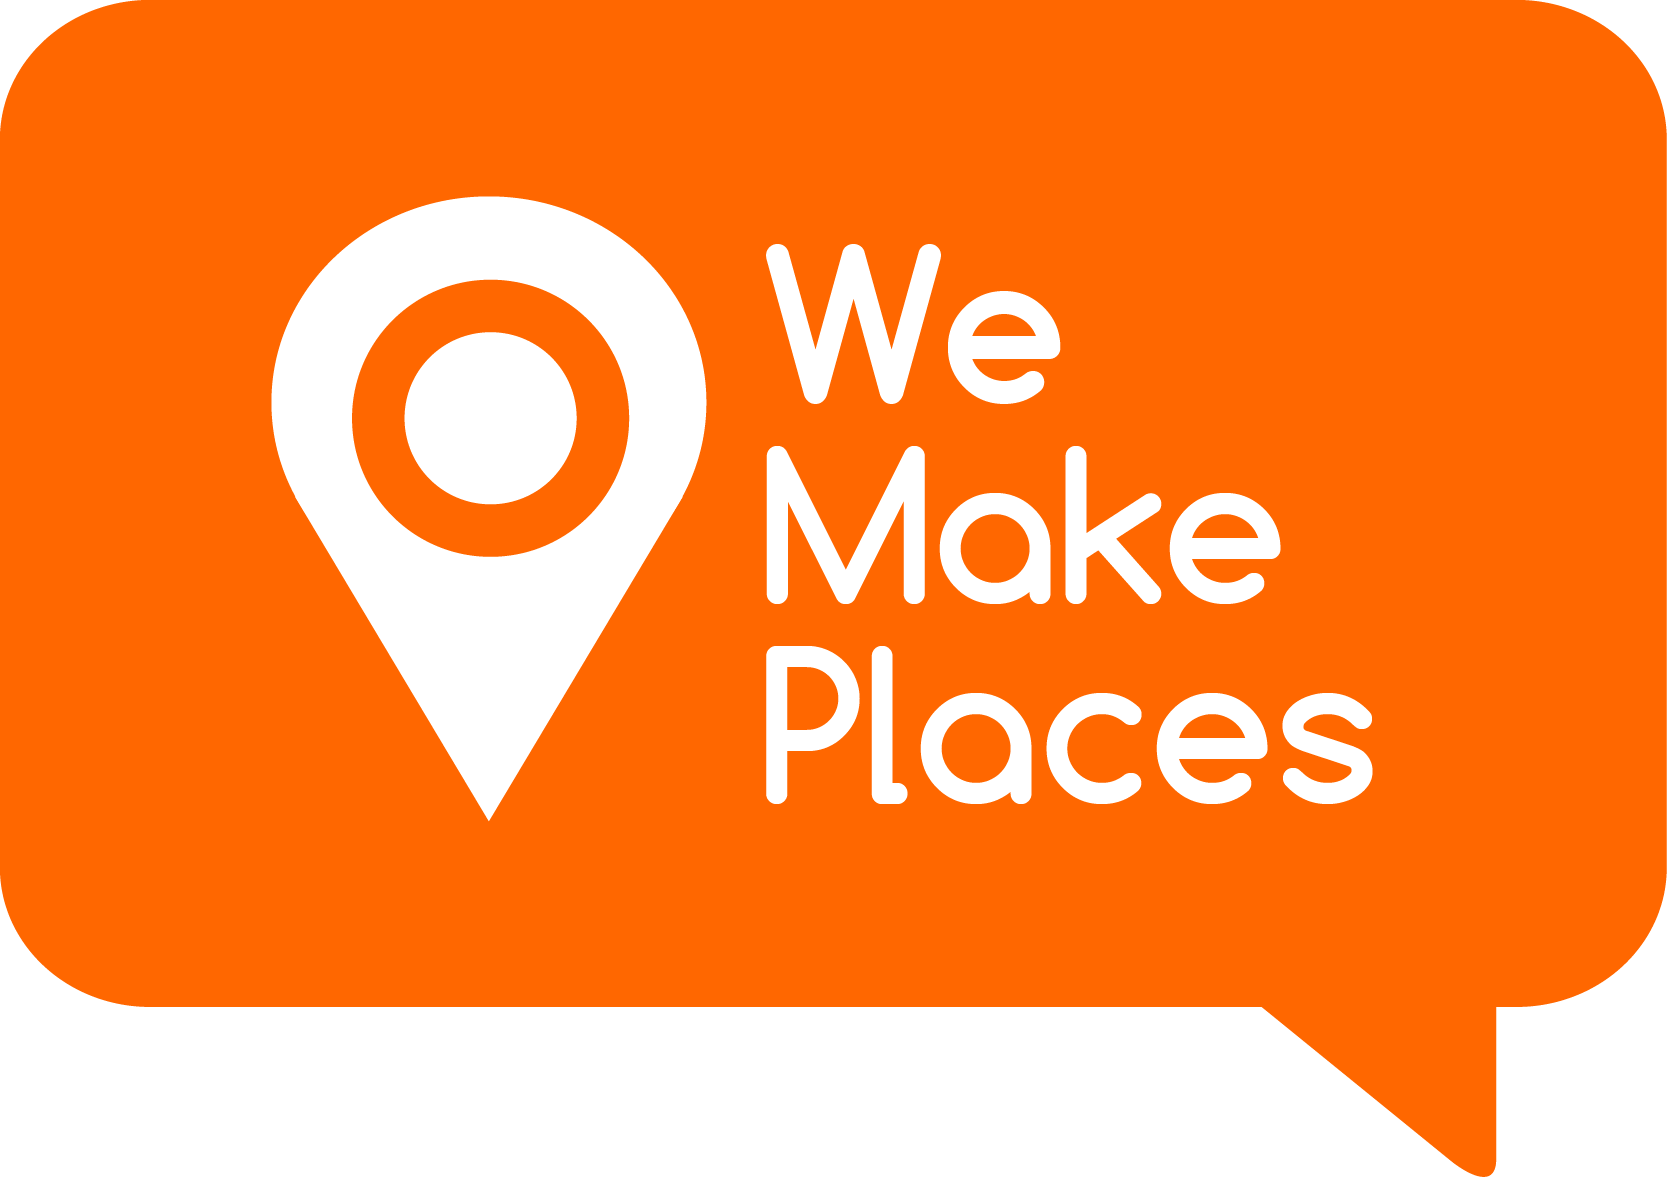 We Make Places